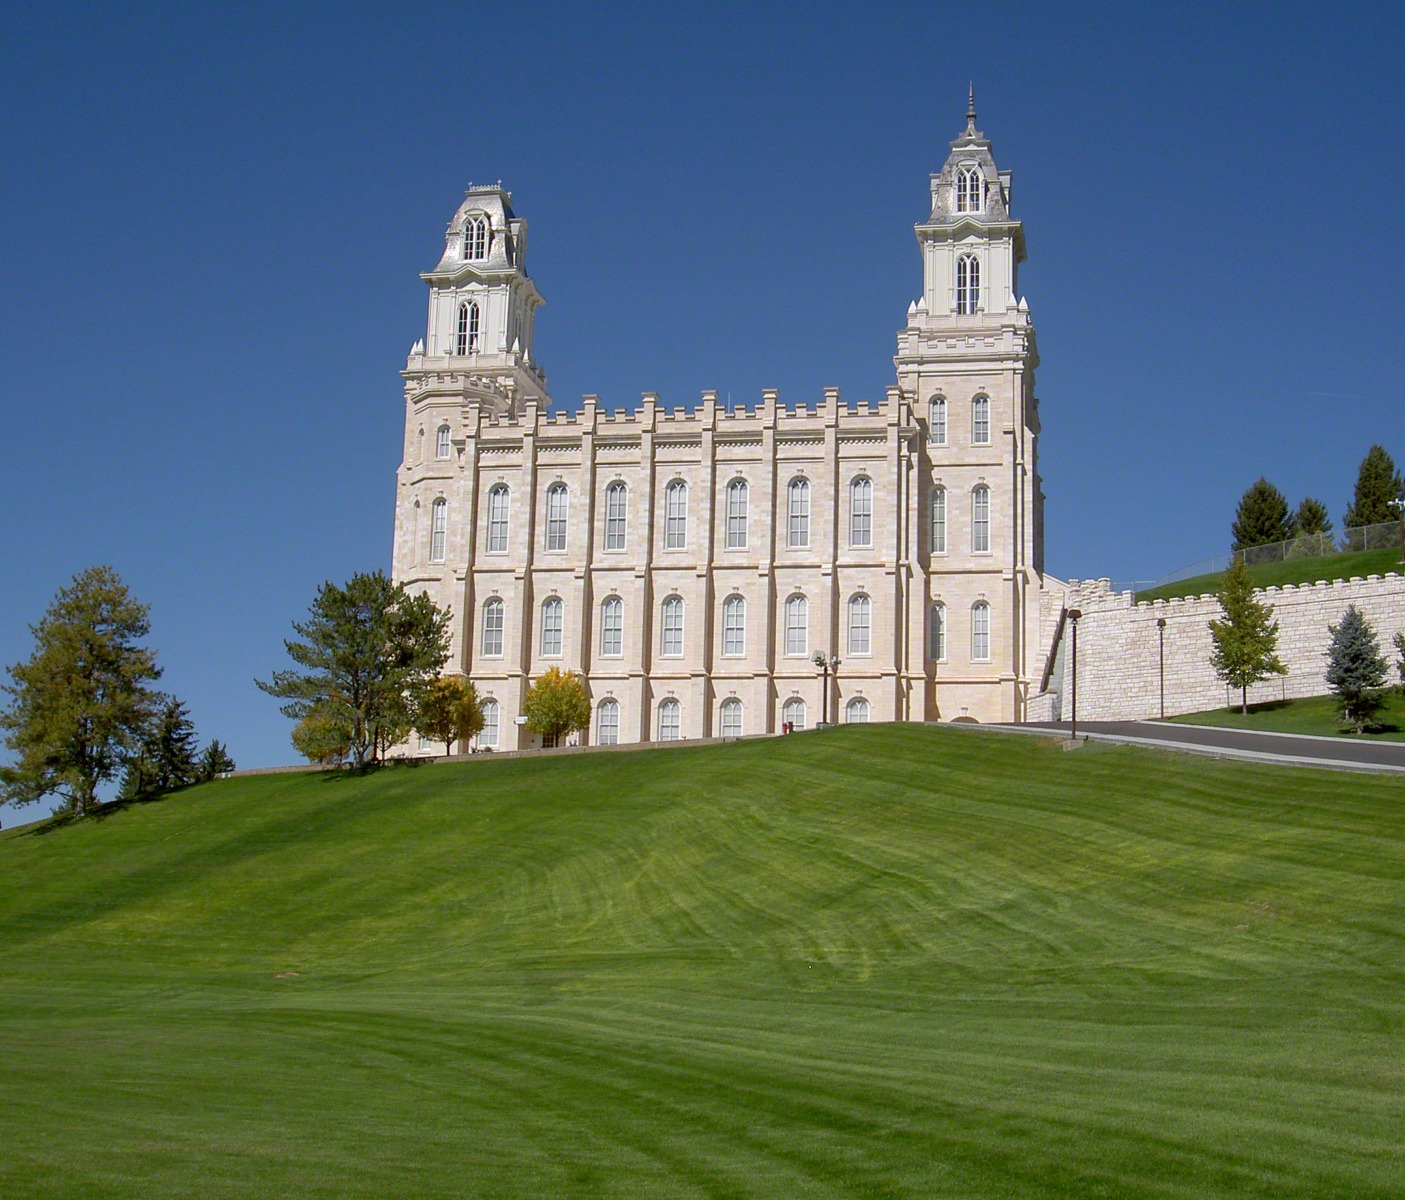 Learn more about the Church of Jesus Christ of Latter Day Saints